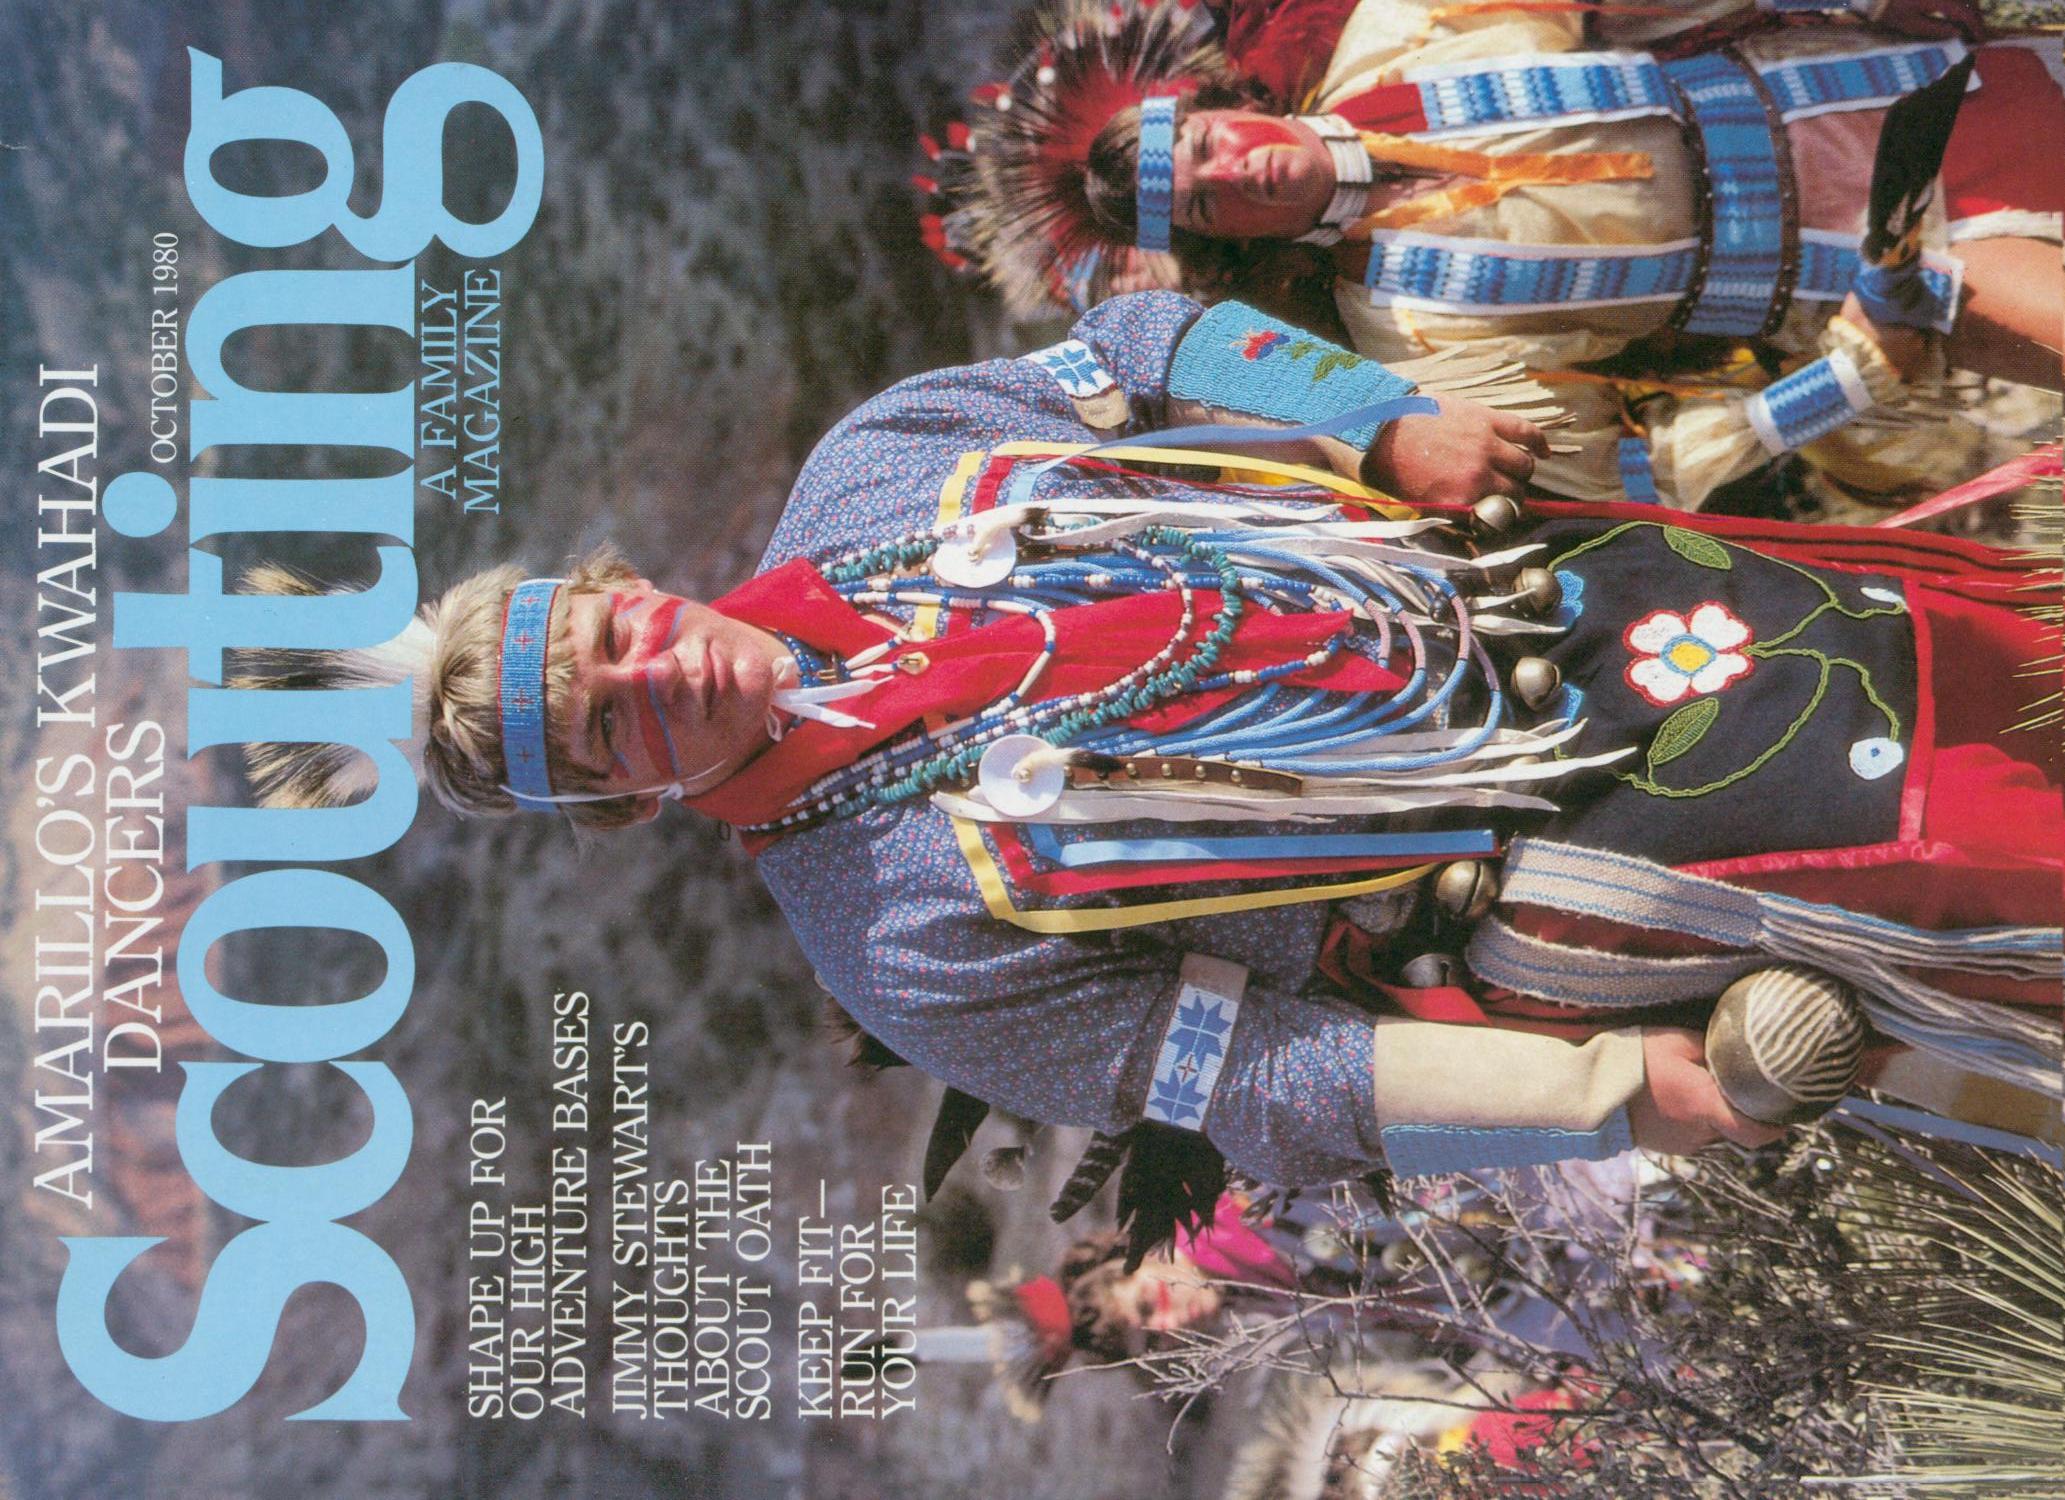 Scouting, Volume 68, Number 5, October 1980
                                                
                                                    Front Cover
                                                